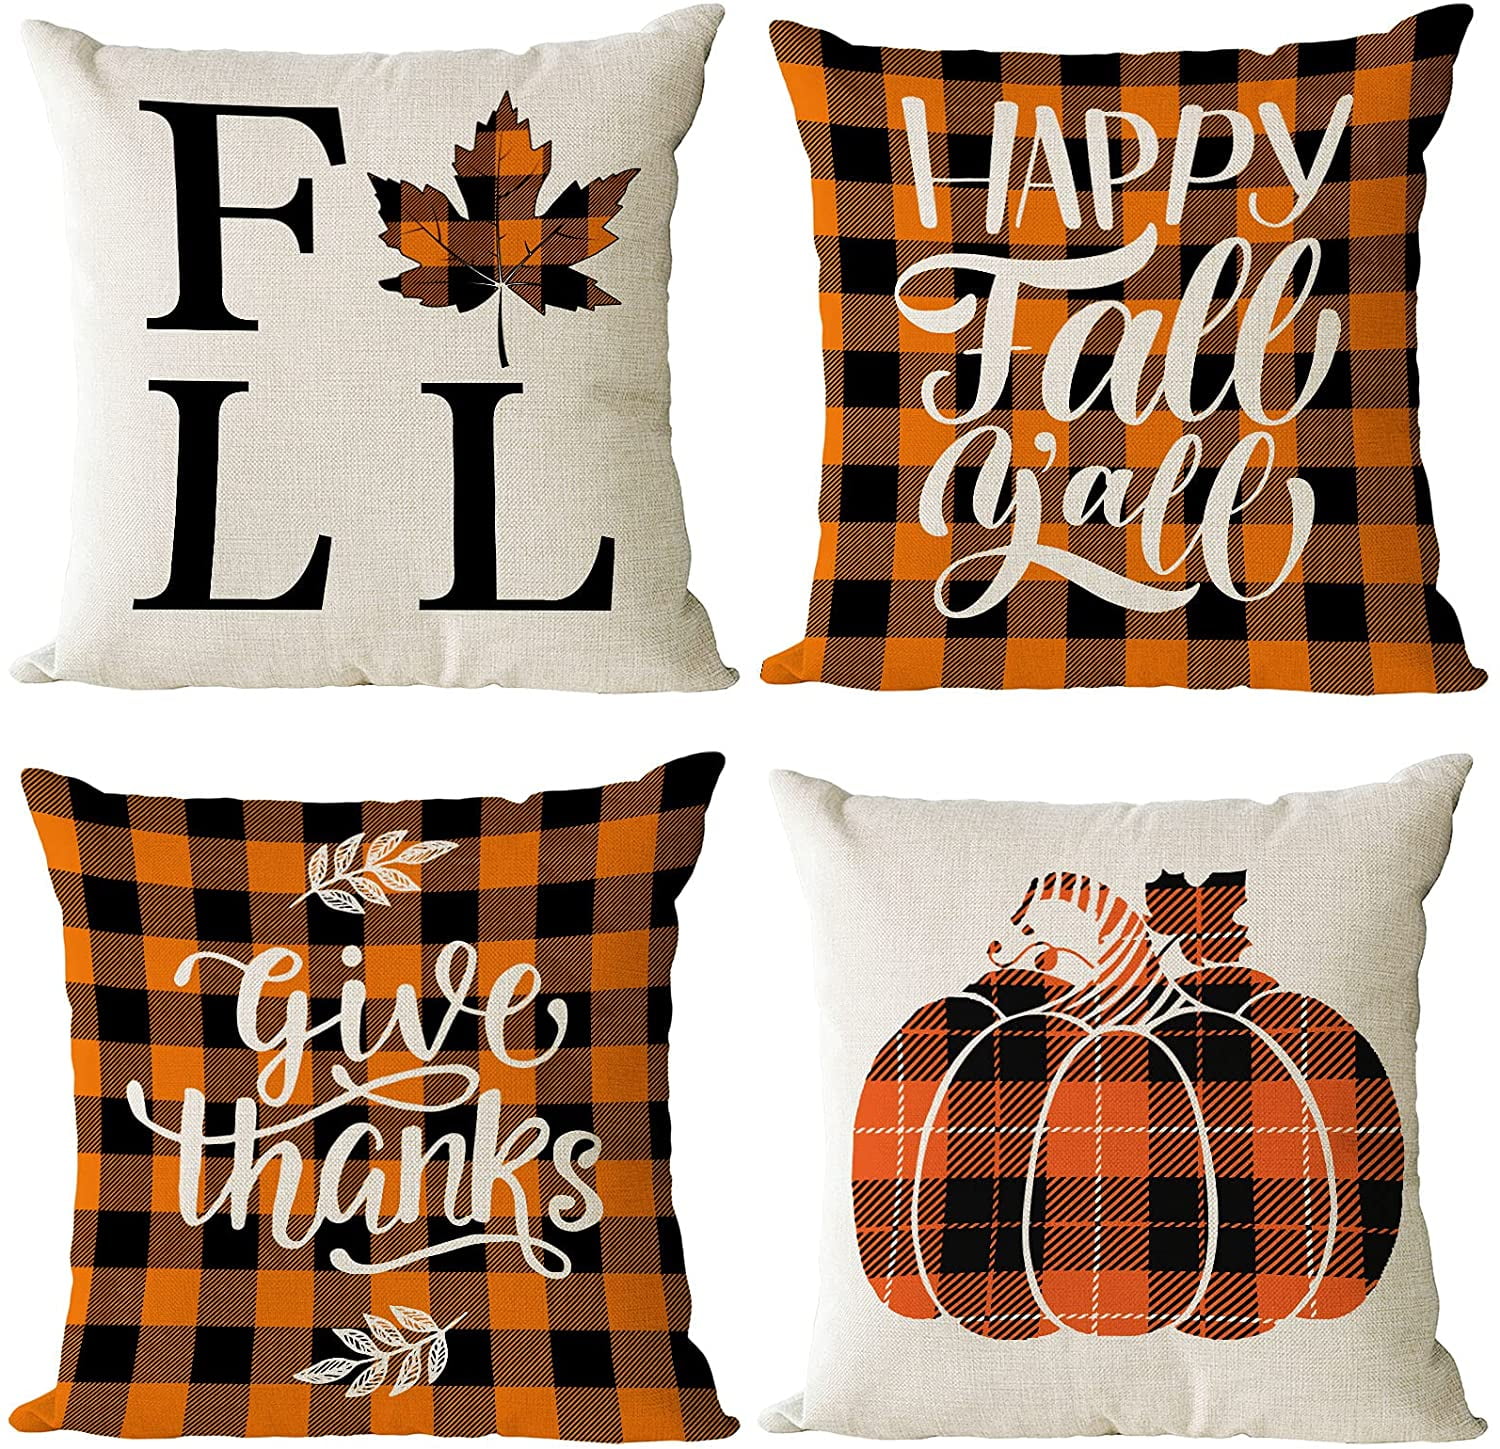 YeeJu Fall Decor Pillow Covers 18x18 Set of 4 Orange Pumpkin Maple Leaf Outdoor Fall Throw Pillows Thanksgiving Autumn Farmhouse Decorative Cushion Case for Home Couch Sofa Decorations 18 inch